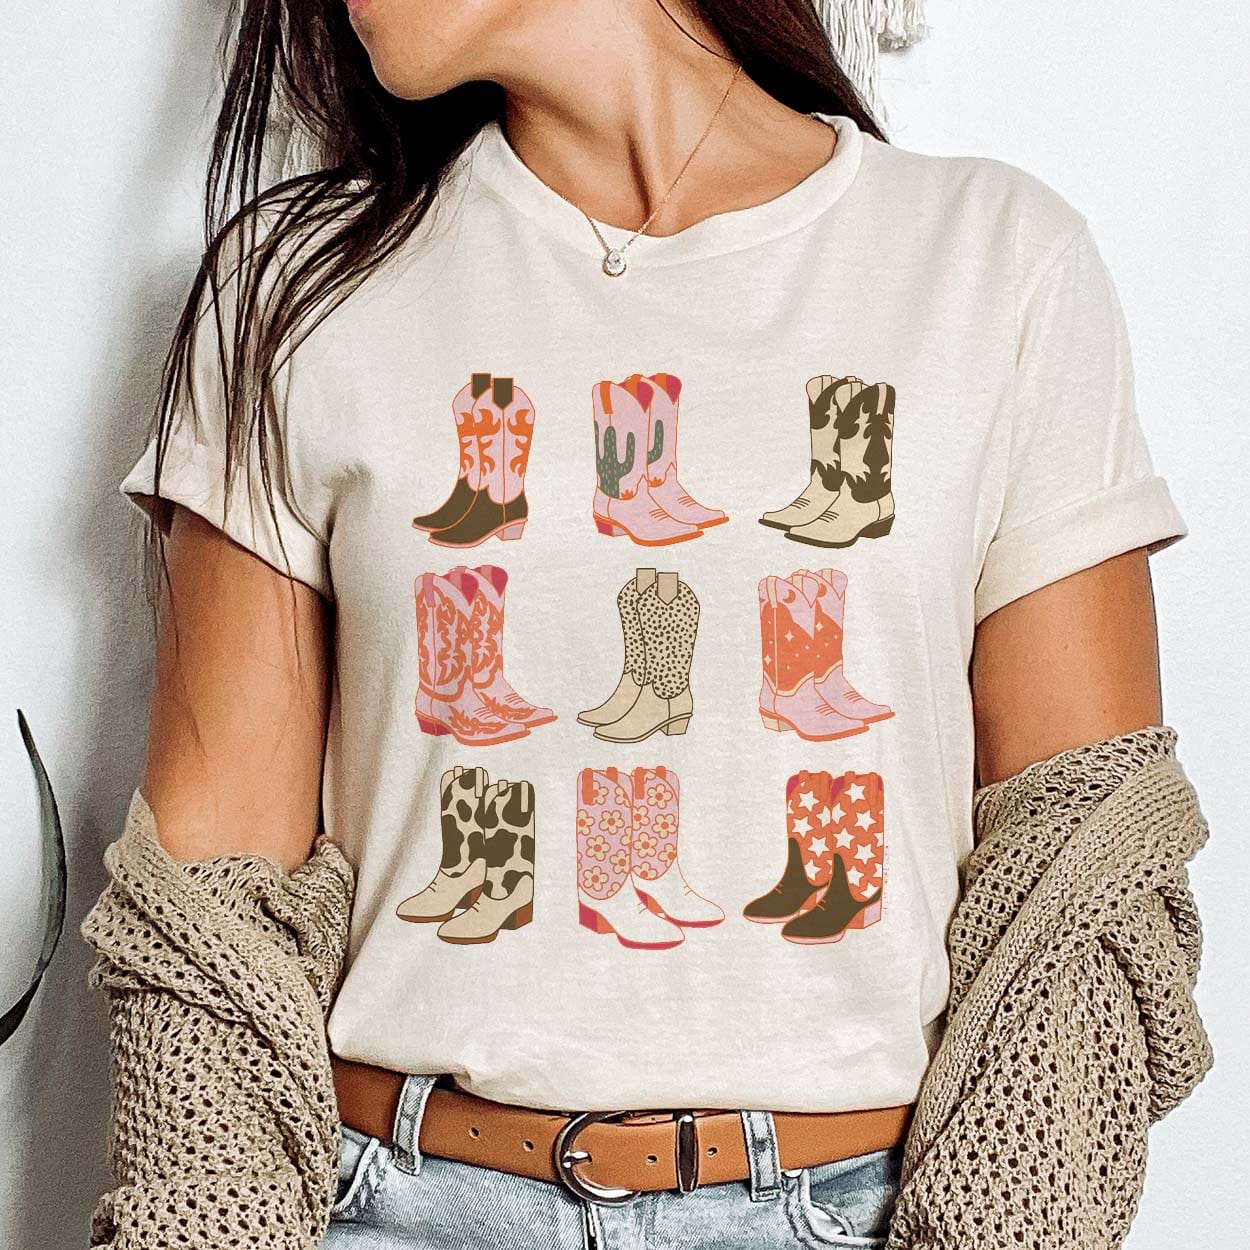 A cream colored short sleeve shirt with cuffed sleeves featuring a graphic of six different pairs of boots. The colors pink, brown, nude, orange, green, and cream are featured on the boots with orange designs, cacti, cow print, stars, polka dots, and flowers. Item is pictured on a plain white background